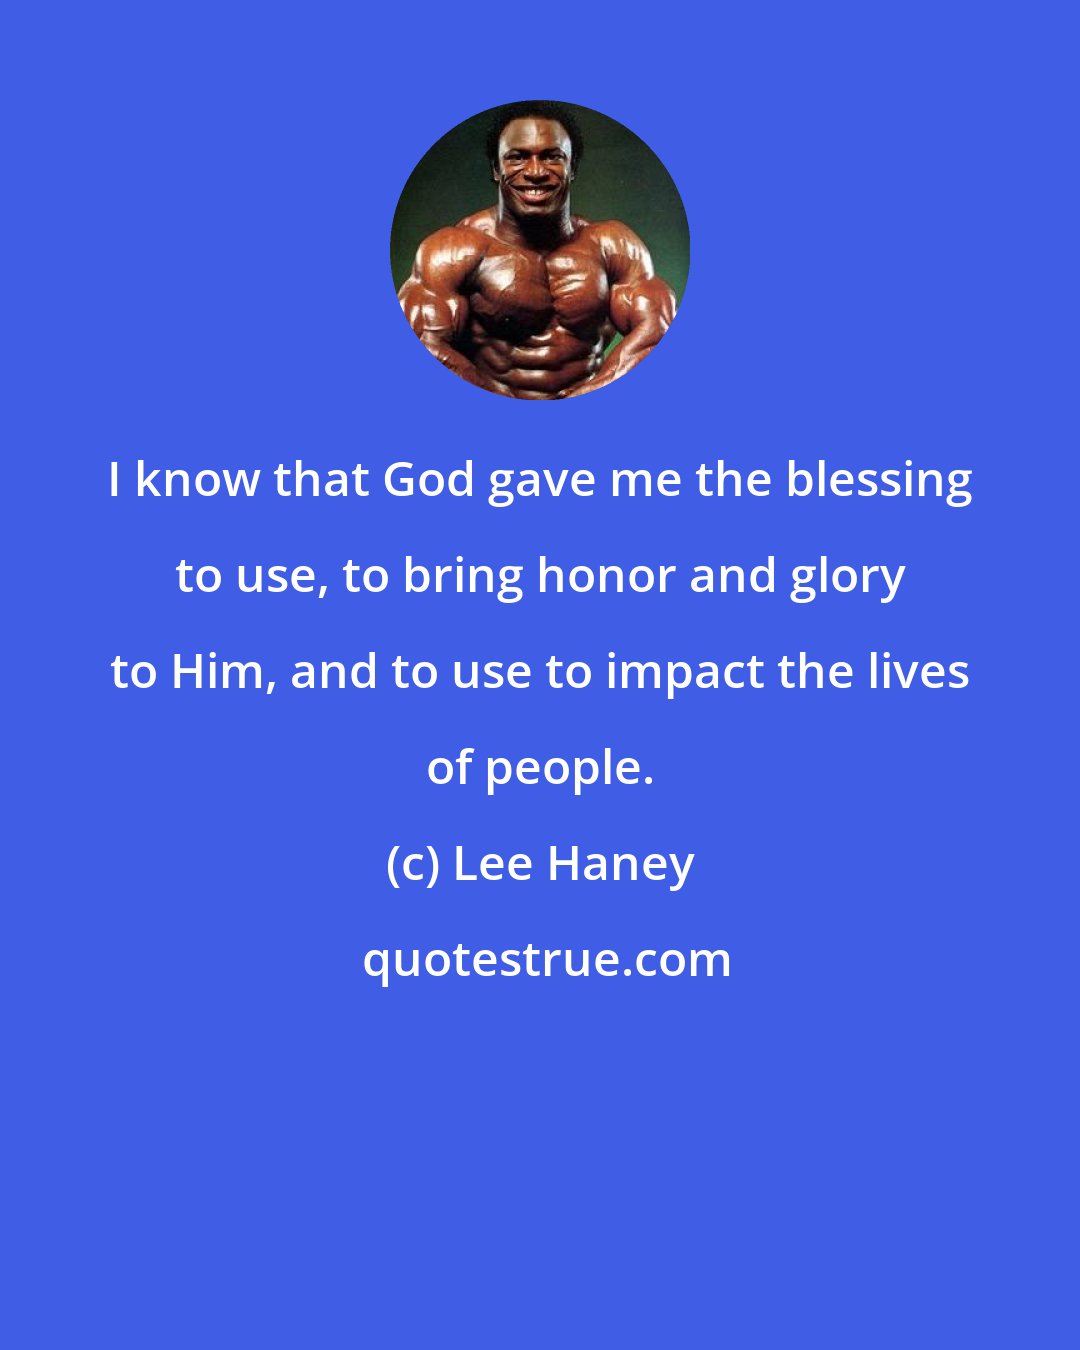 Lee Haney: I know that God gave me the blessing to use, to bring honor and glory to Him, and to use to impact the lives of people.